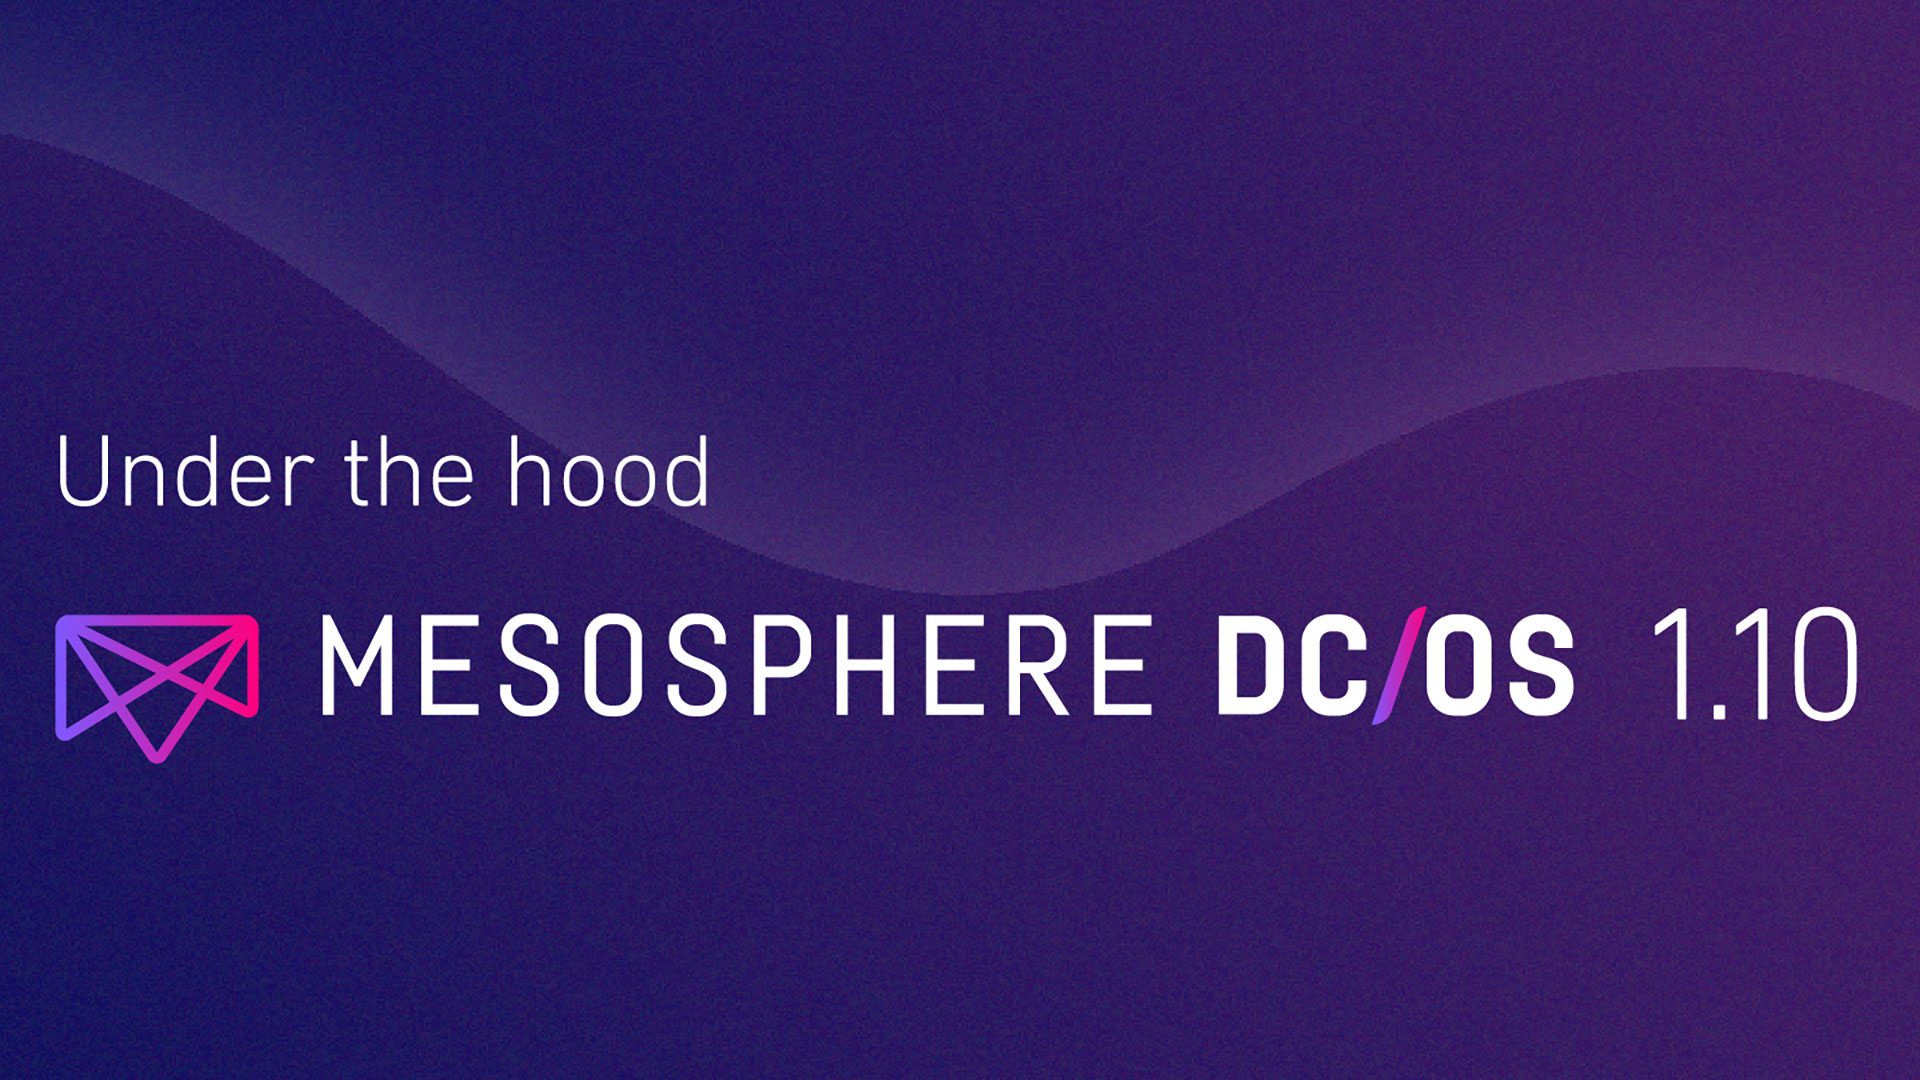 Under the Hood of Mesosphere DC/OS 1.10